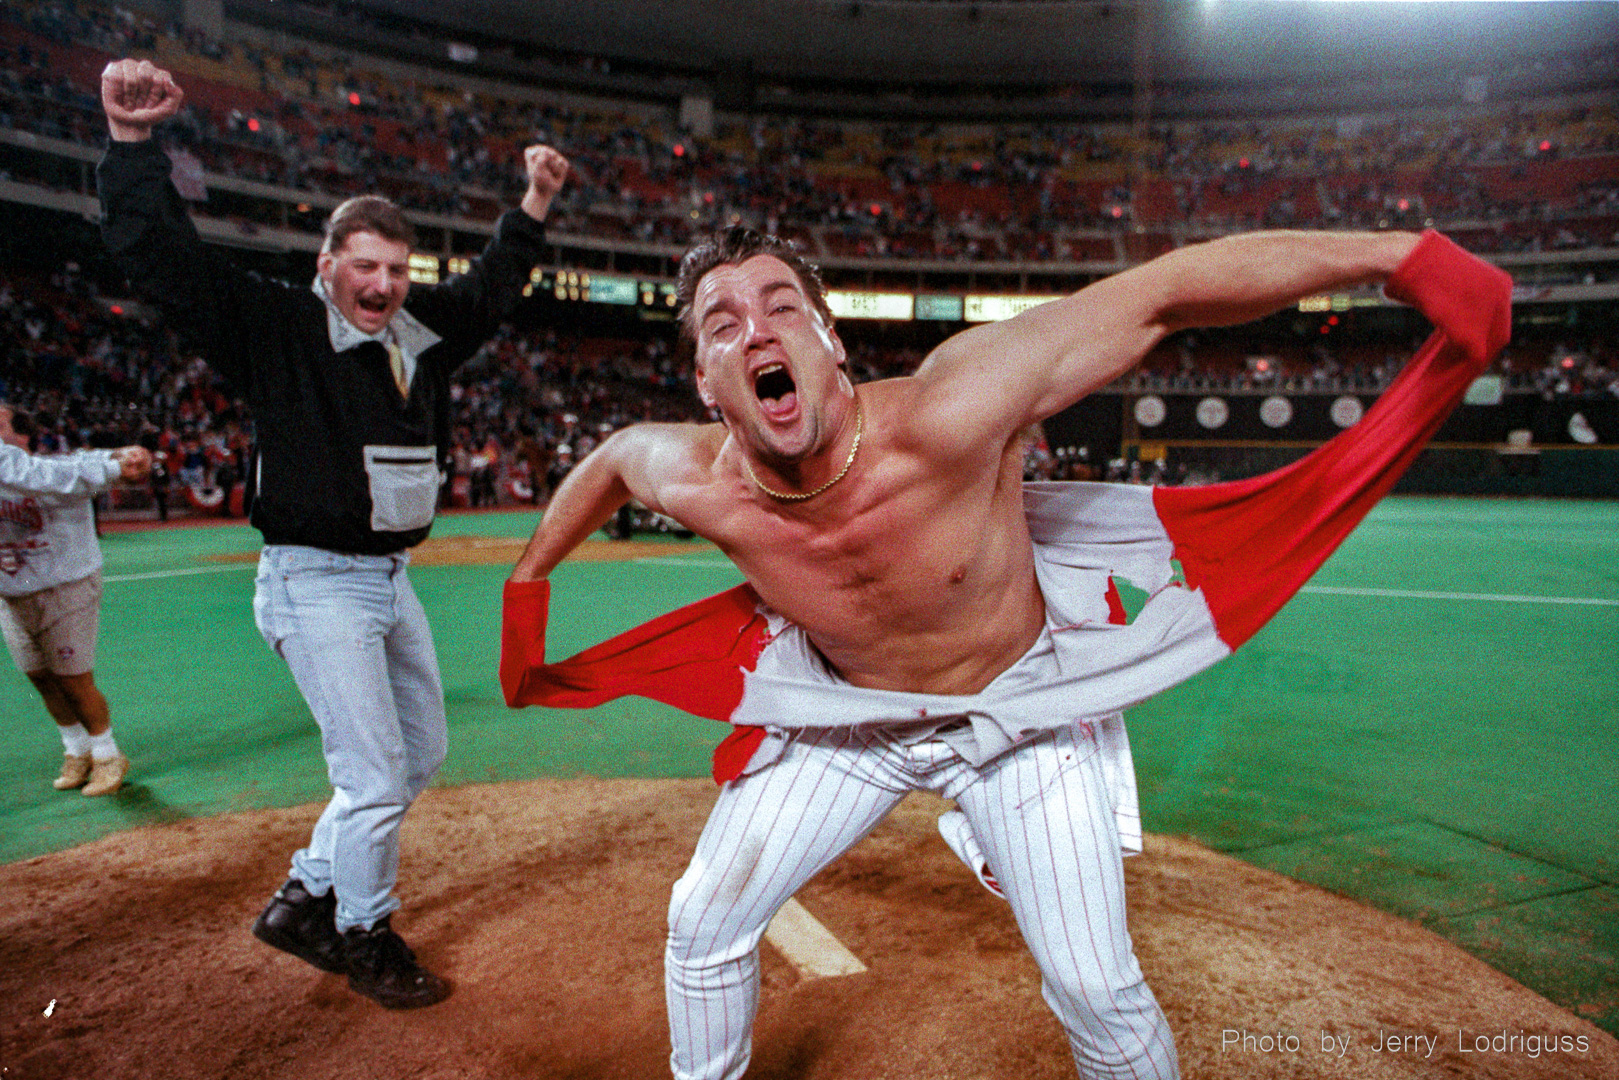 Phillies pitcher Danny Jackson does his imitation of the Incredible Hulk by ripping off his jersey after getting "pumped up" after the Philadelphia Phillies won the National League Pennant by beating the Atlanta Braves 6-3 at Veterans Stadium in Philadelphia on Wednesday October 13, 1993 in game 6 of the National League Championship series.